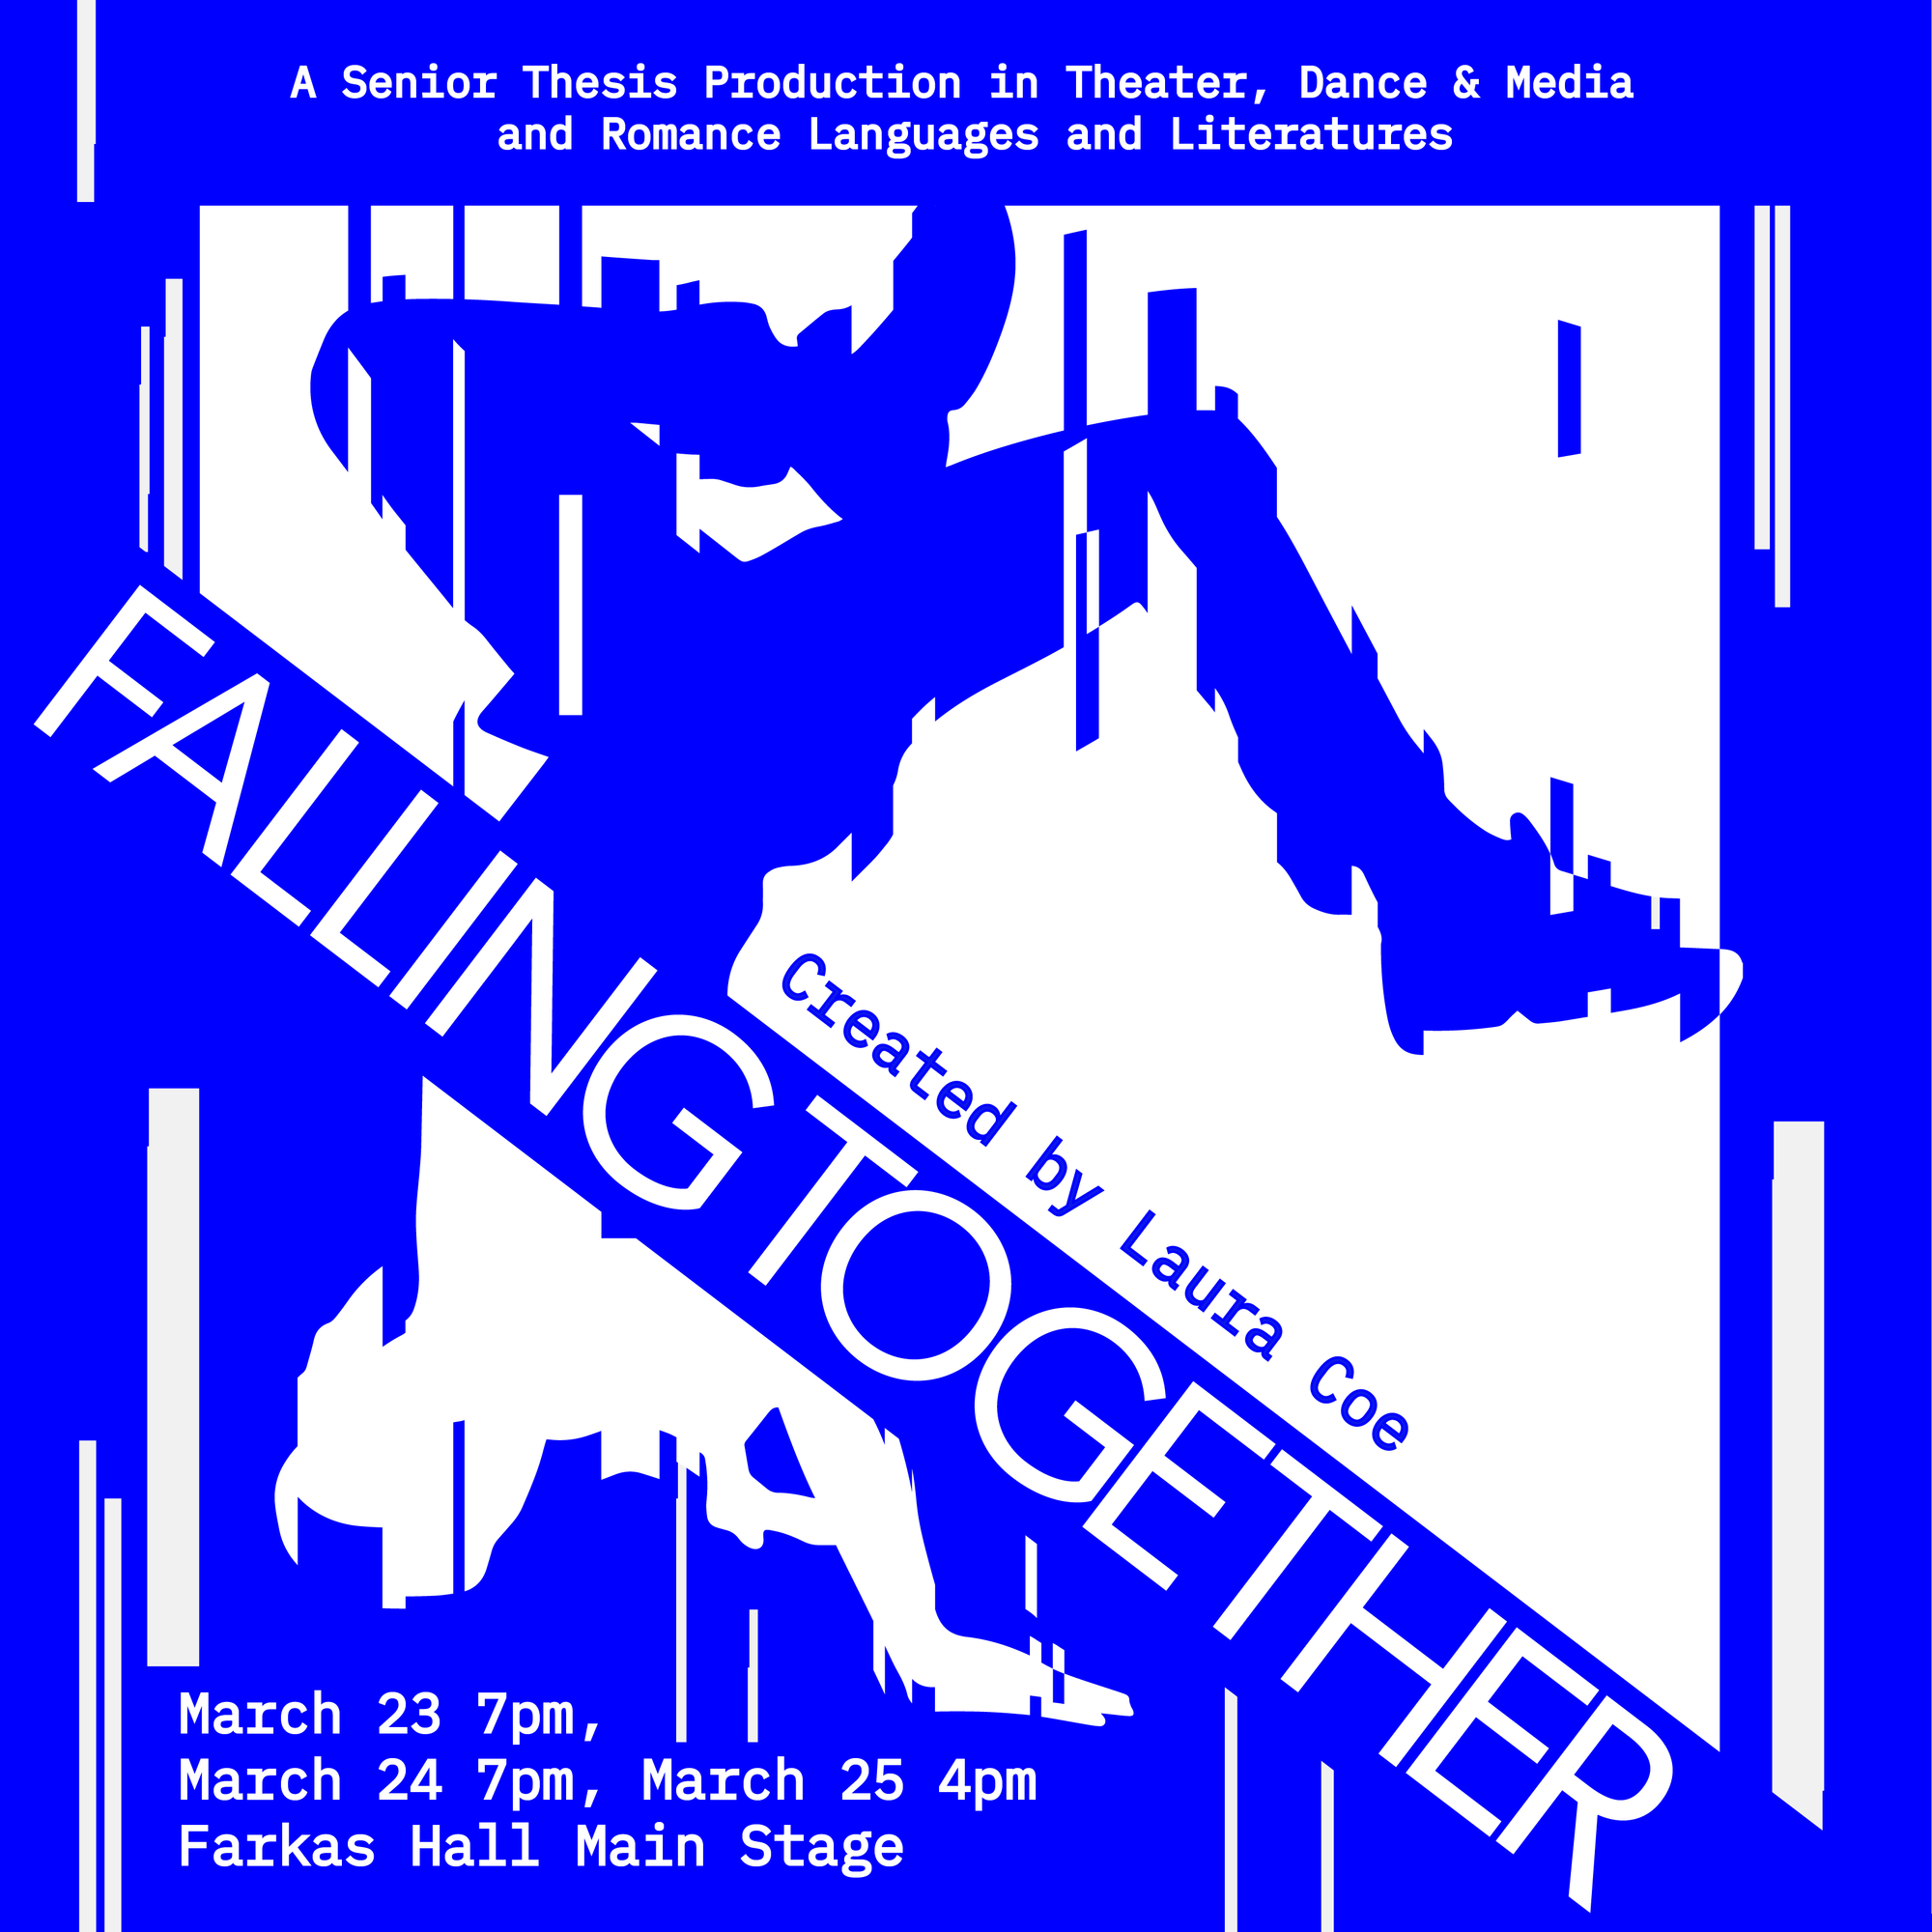 Falling together poster designed in blue and white. Illustration of dancer in an inversion with legs staggered and event information displayed across and on the borders of the the image.